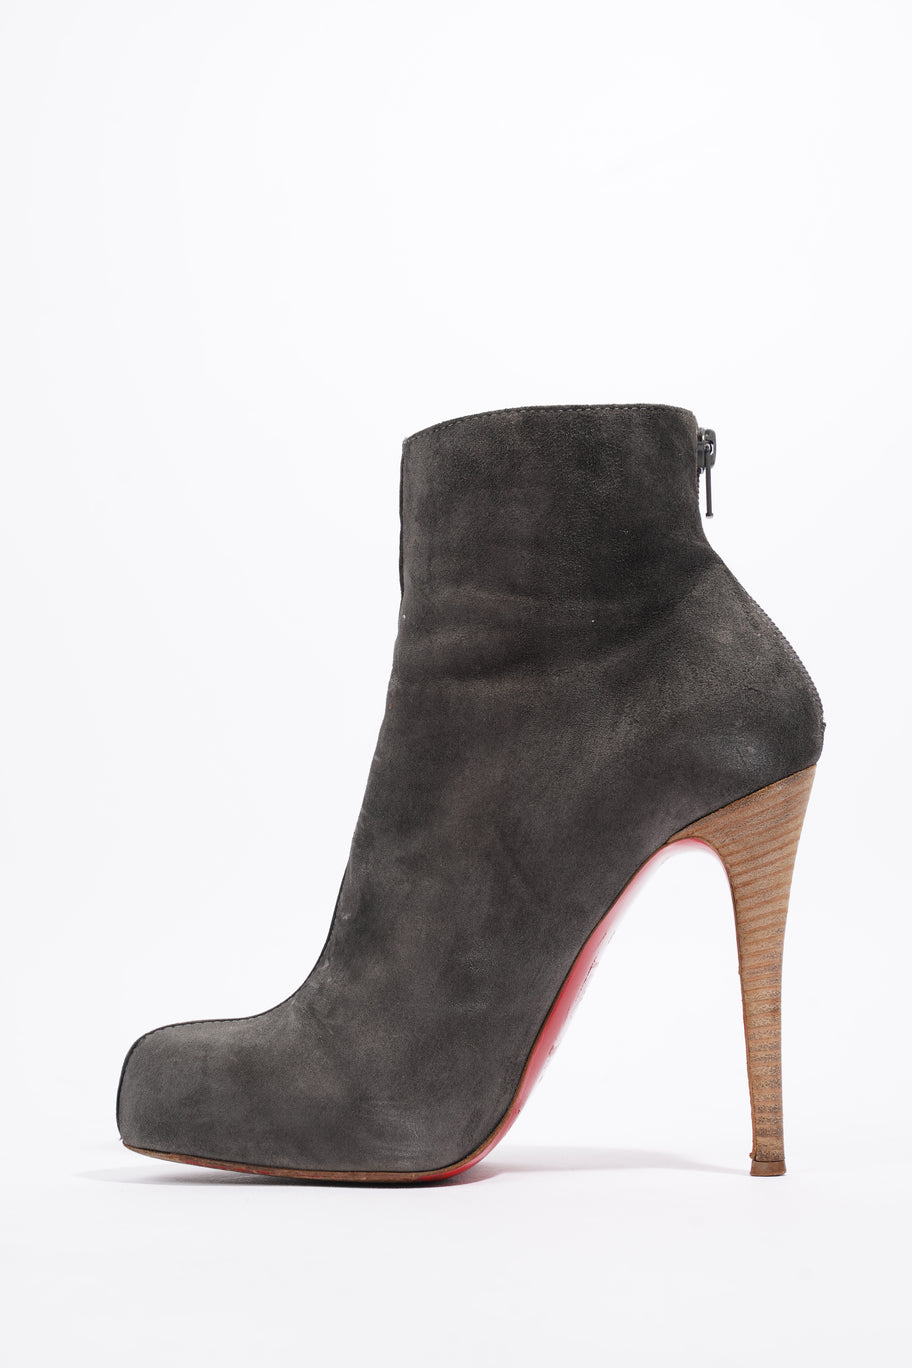 Ankle Boot Grey Suede EU 38 UK 5 Image 3